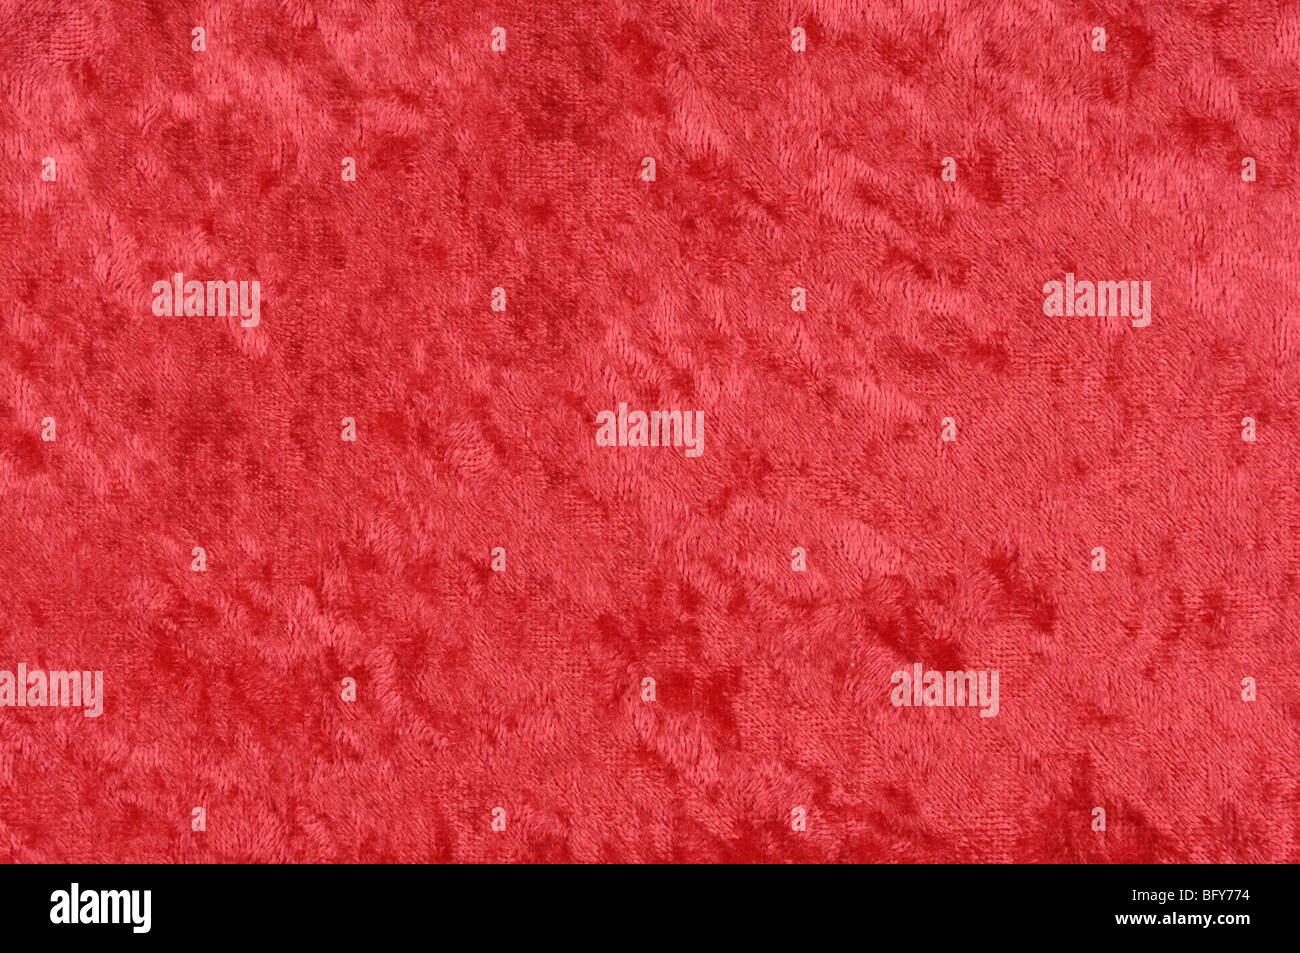 Shiny red fabric background texture Stock Photo